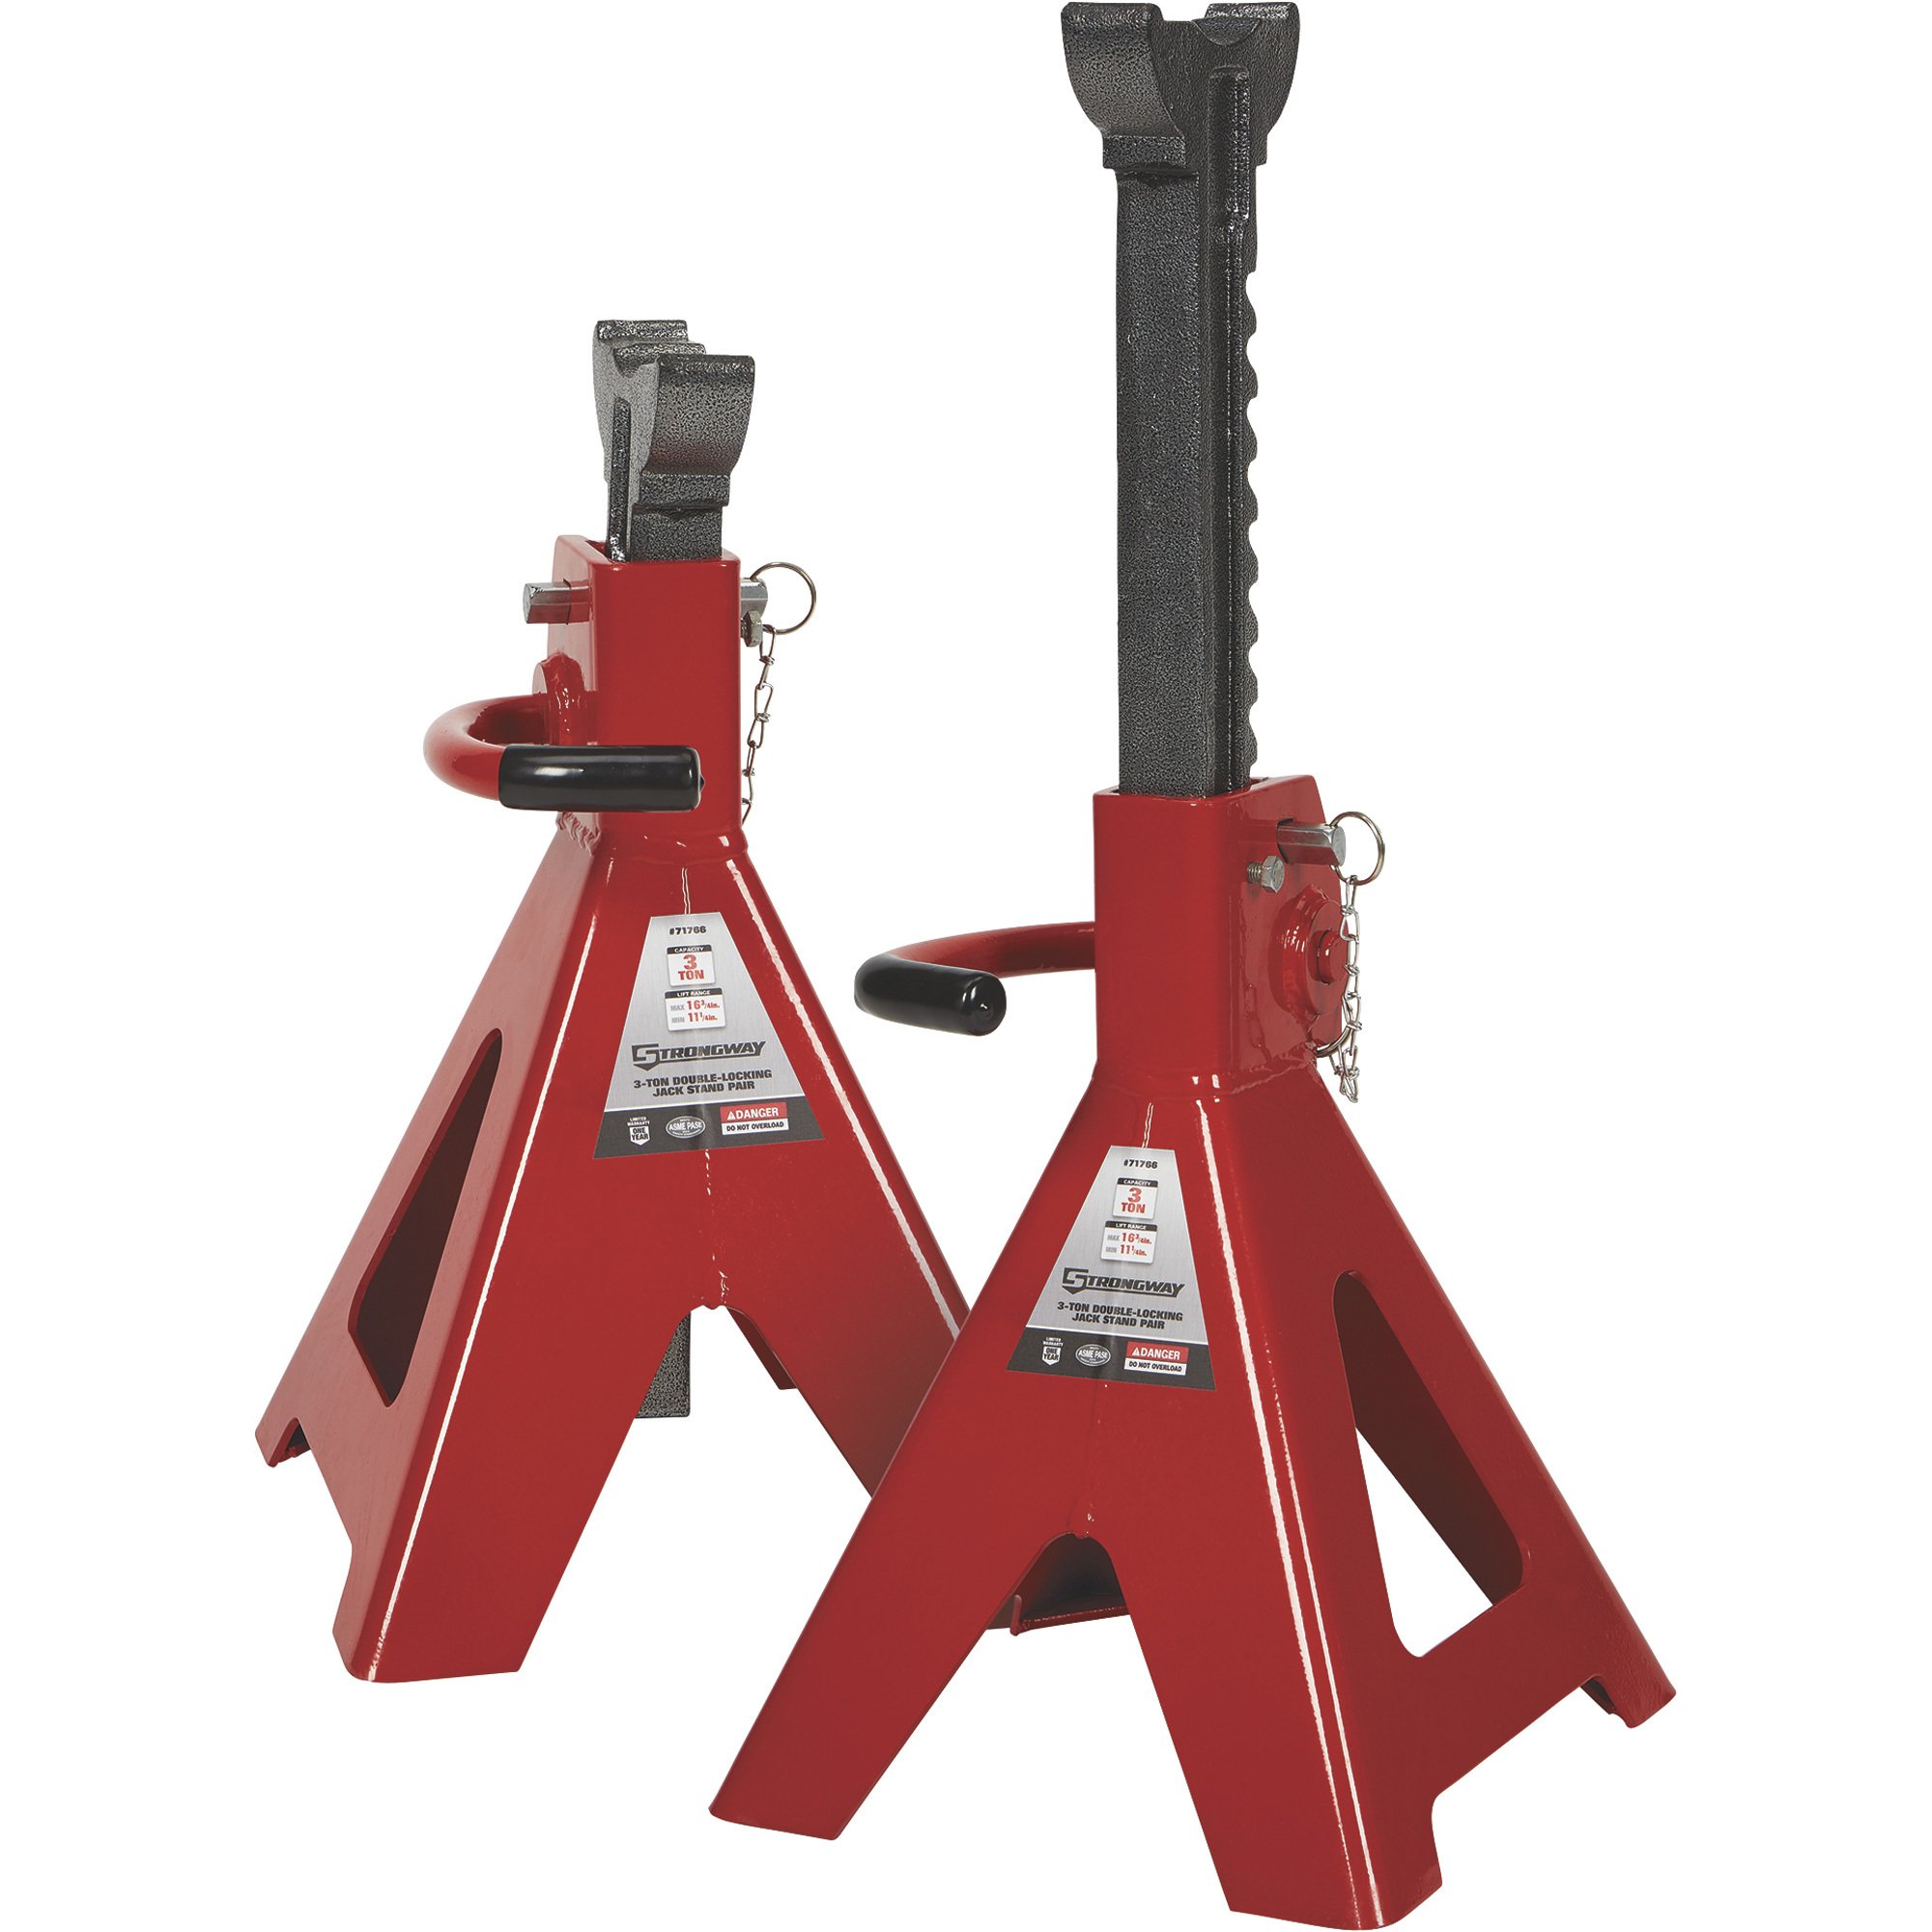 Strongway Double-Locking 3-Ton Jack Stands — 6,000-lb. Total